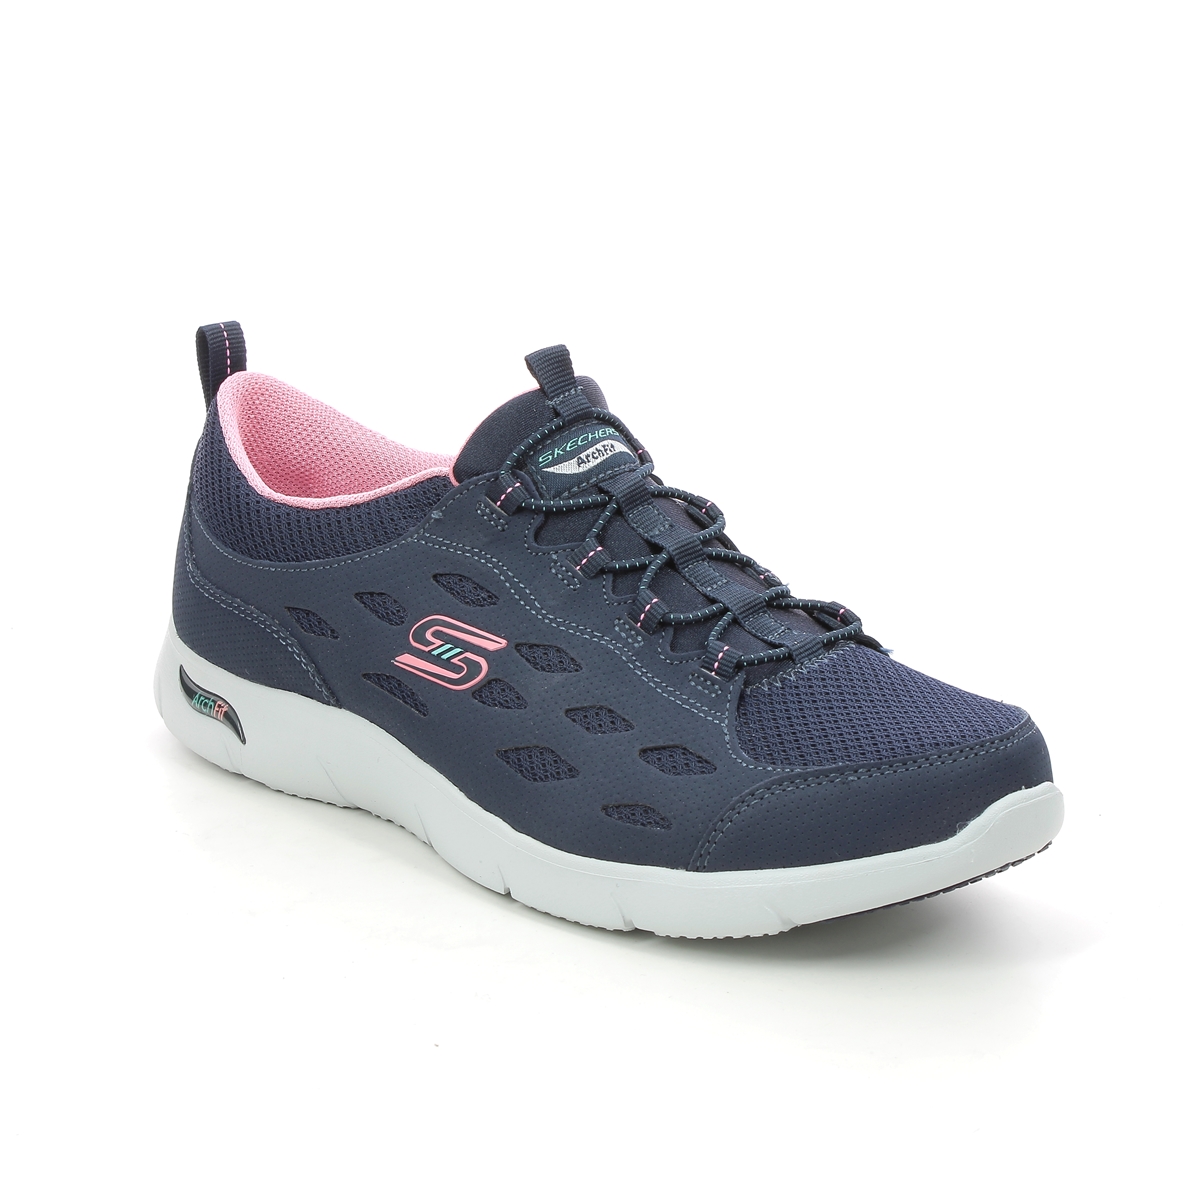 Skechers Arch Fit Refine NVCL Navy Coral Womens trainers 104163 in a Plain Man-made in Size 7